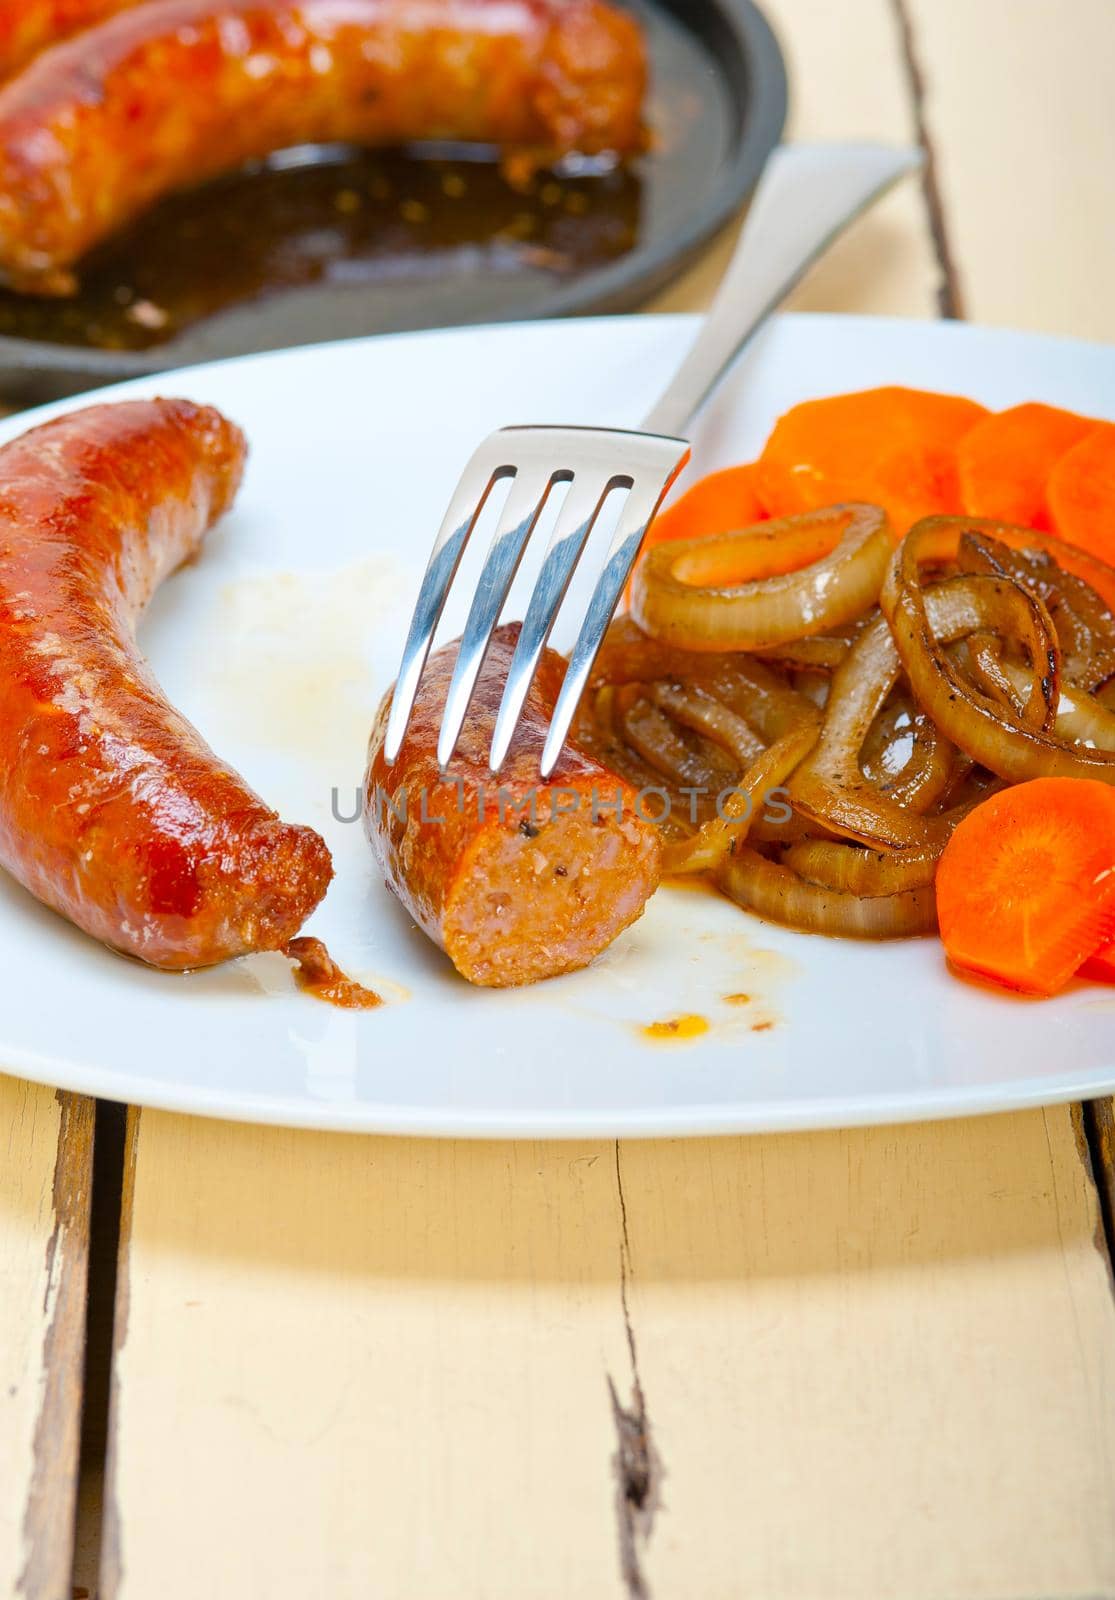 beef sausages cooked on iron skillet  by keko64